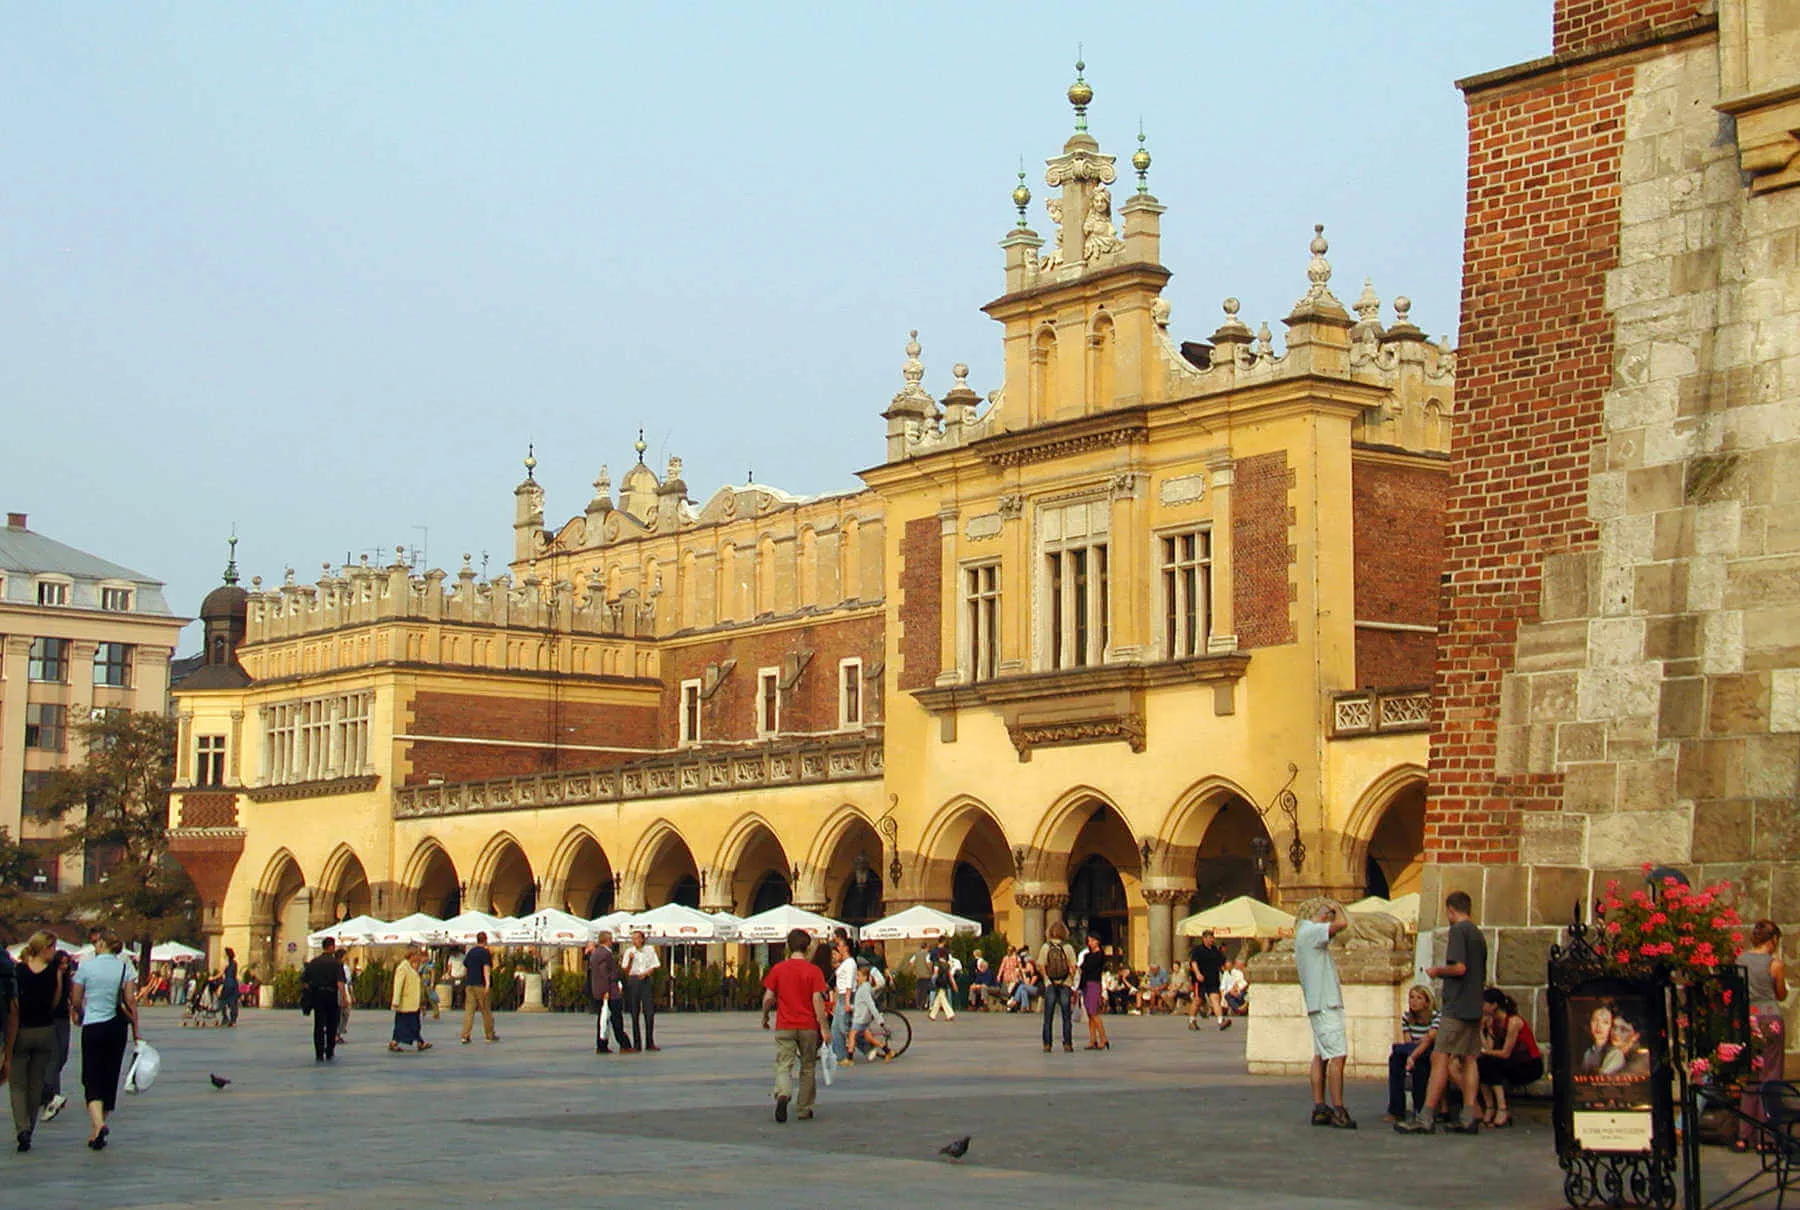 Kraków’s main square is pleasant day or night